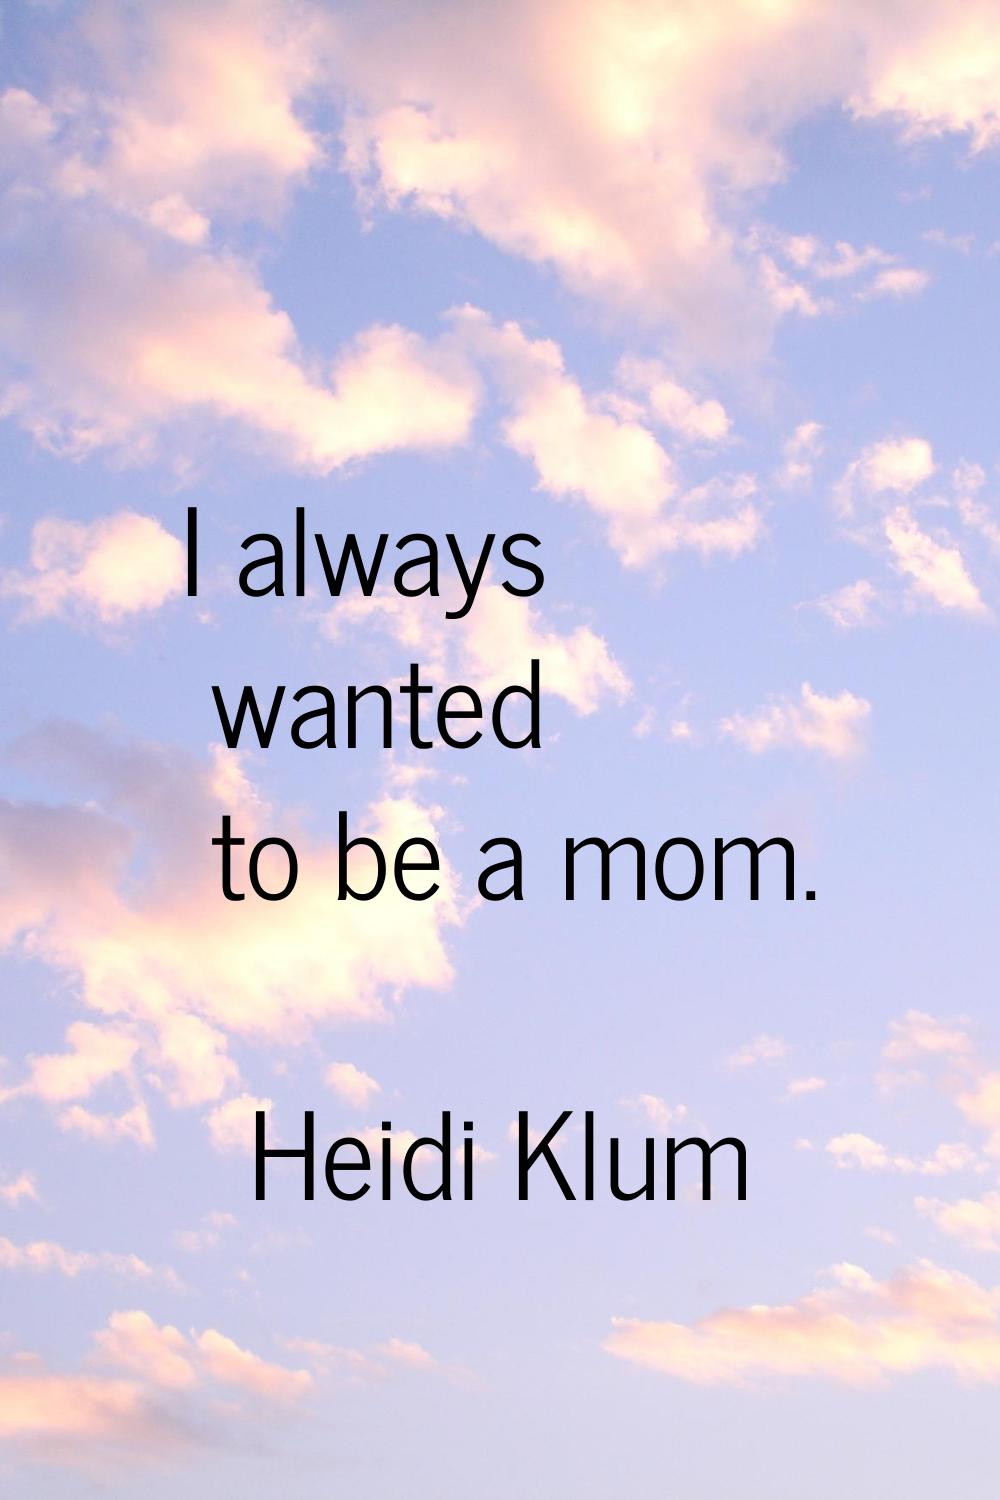 I always wanted to be a mom.